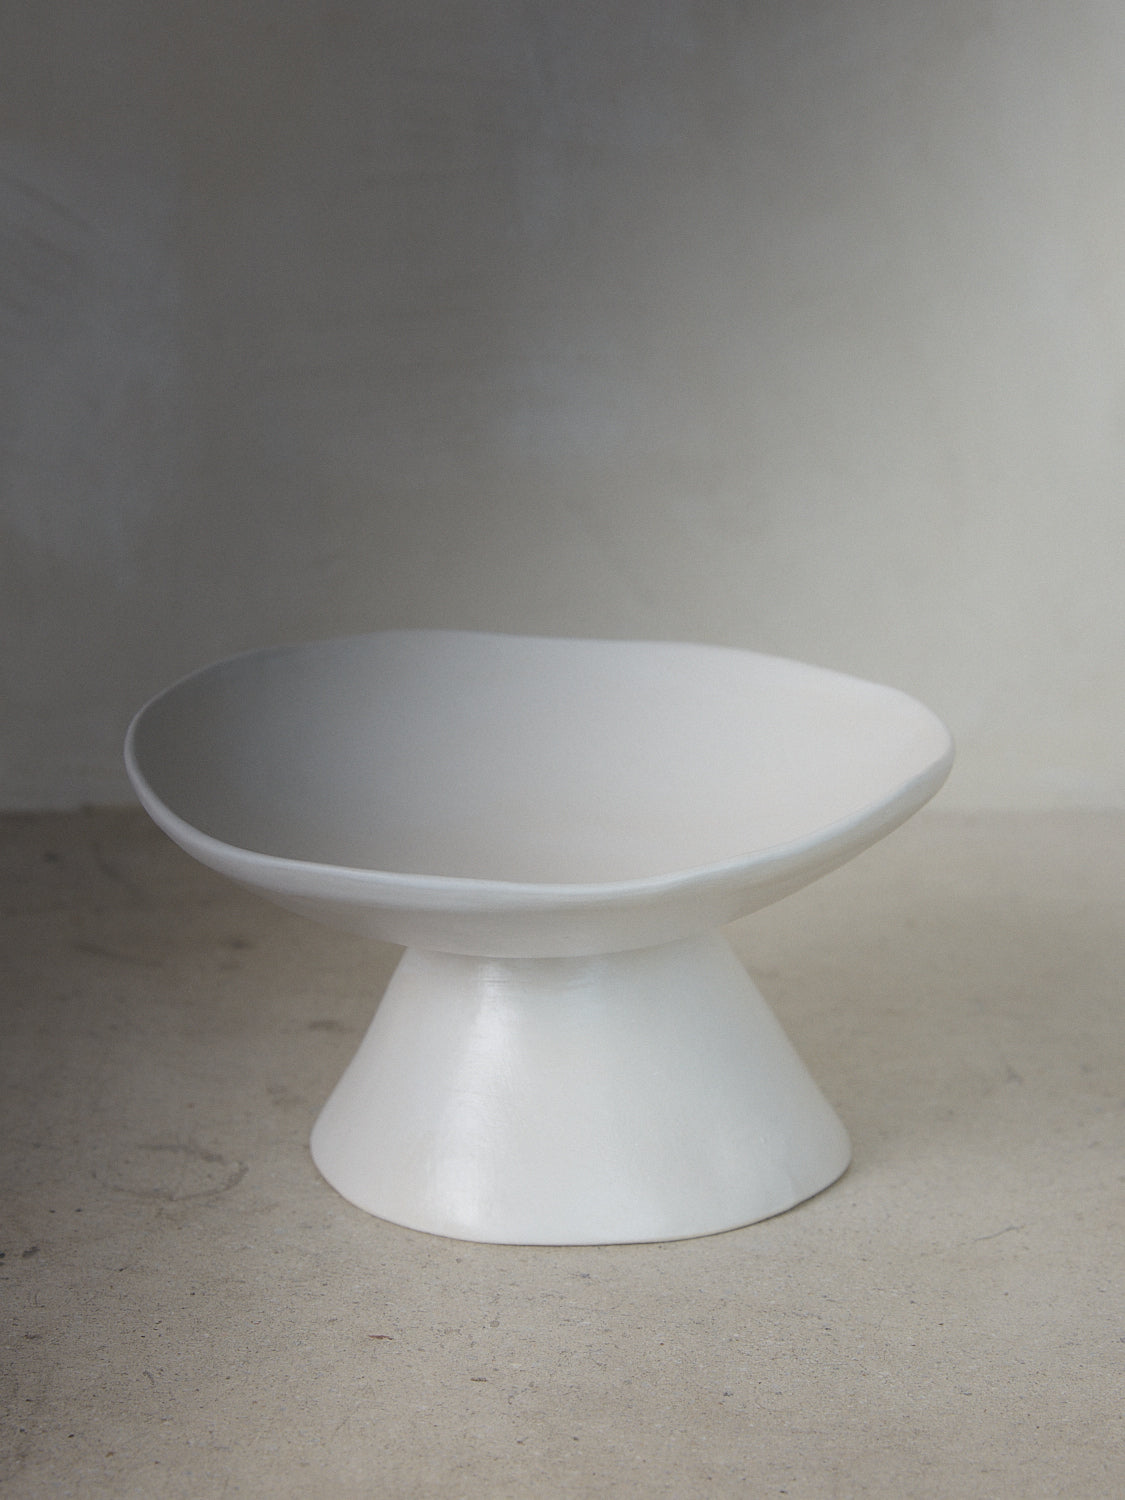 Raw Compote Pedestal. Exclusively ours. Handmade ceramic compote bowl with tapered pedestal foot base in a matte white finish.